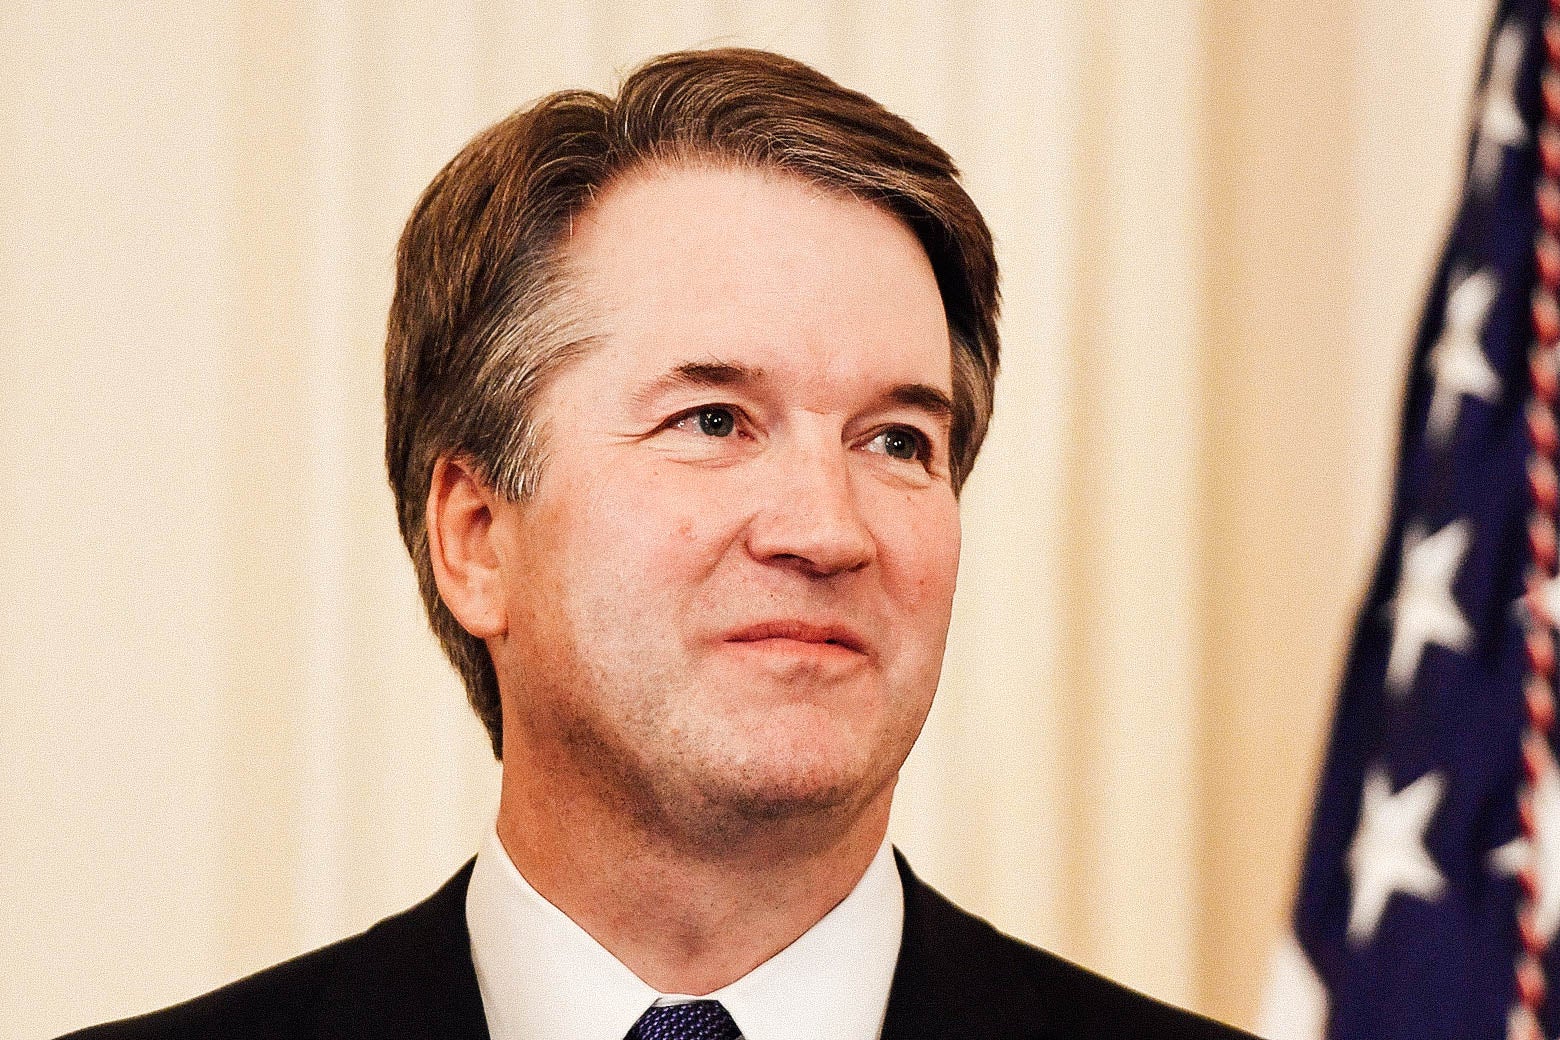 Brett Kavanaugh looks on as Donald Trump announces him as his nominee to the Supreme Court.